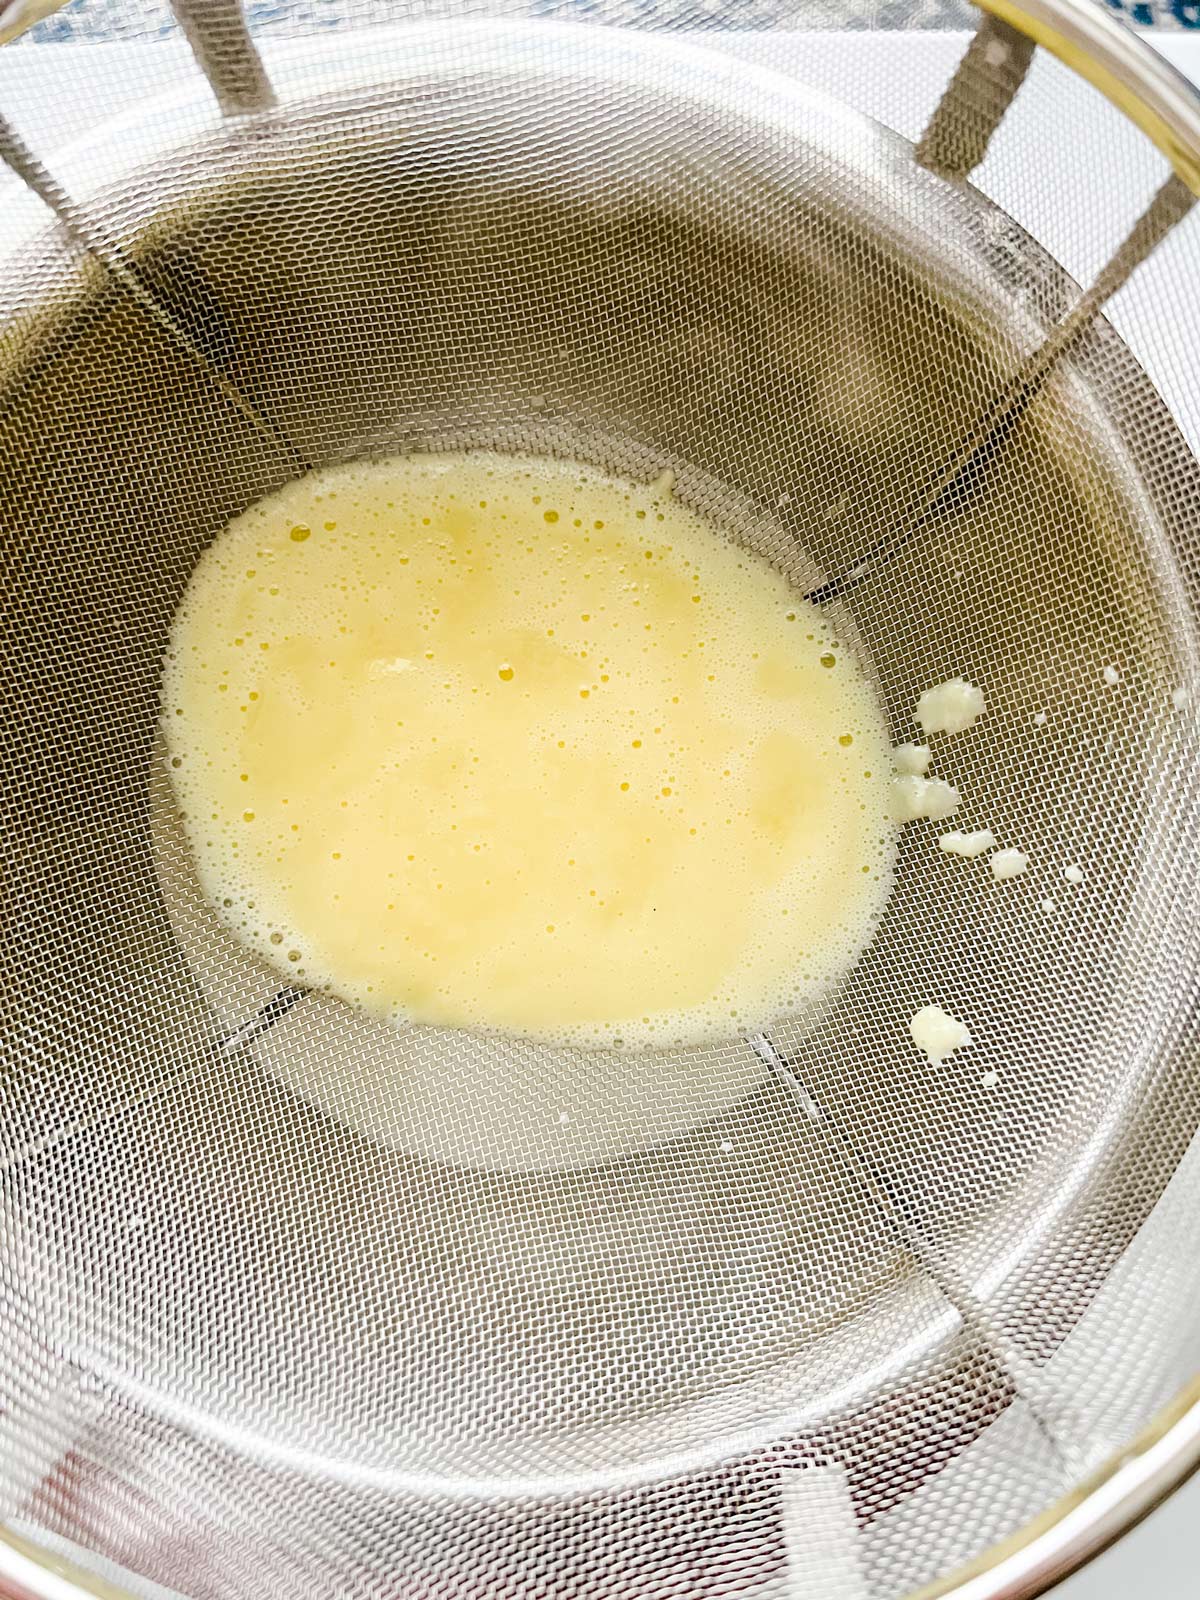 A cooked egg and milk mixture being strained into a bowl of heavy cream.